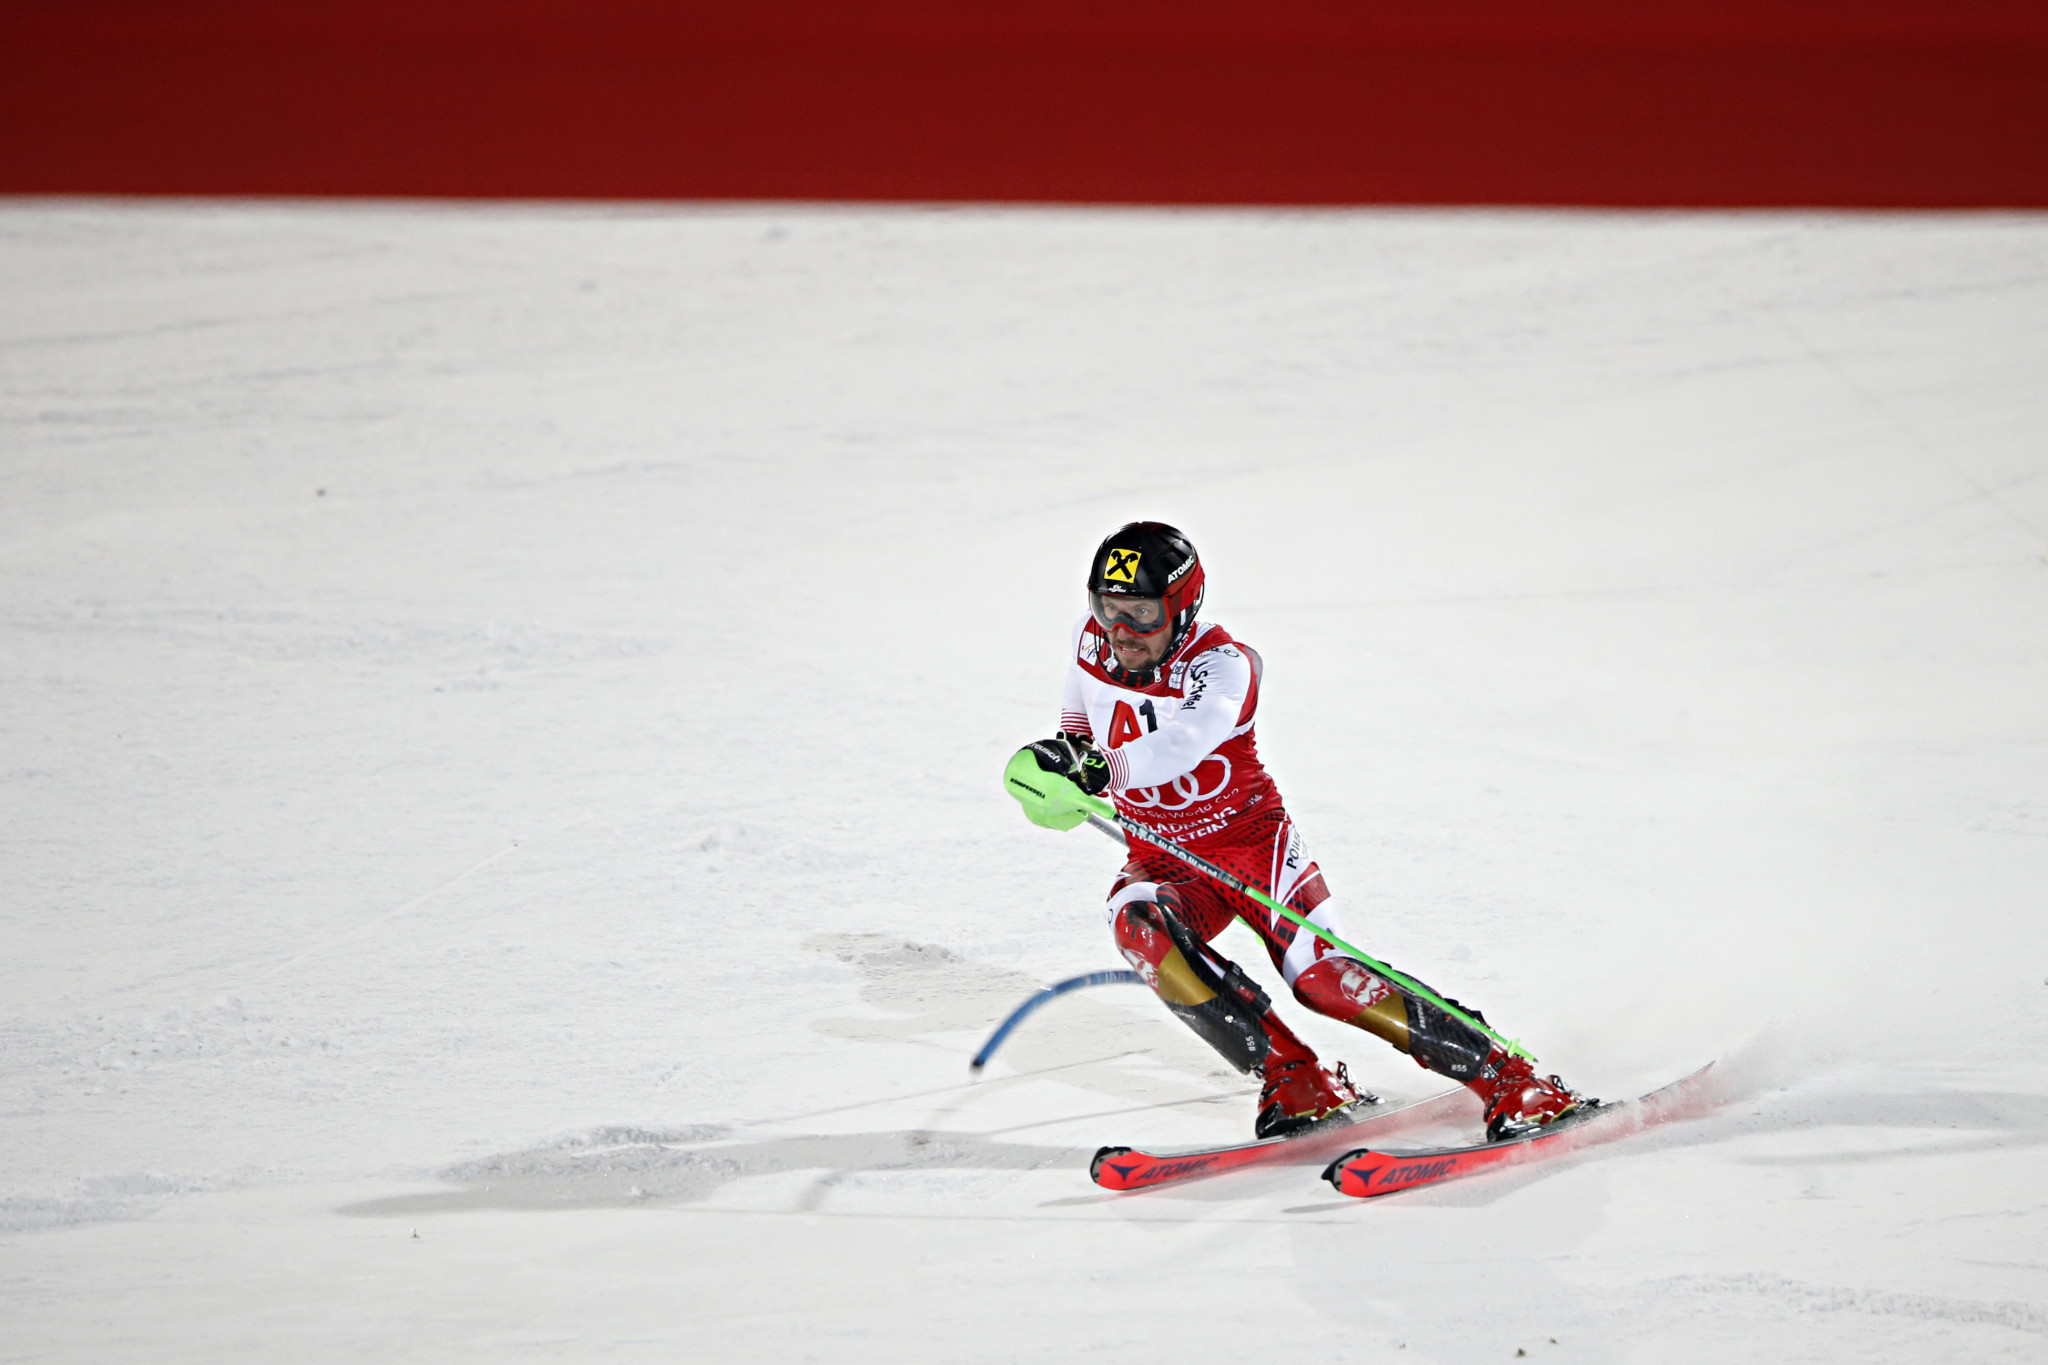 Marcel Hirscher produced a dominant display to win in Schladming ©Getty Images